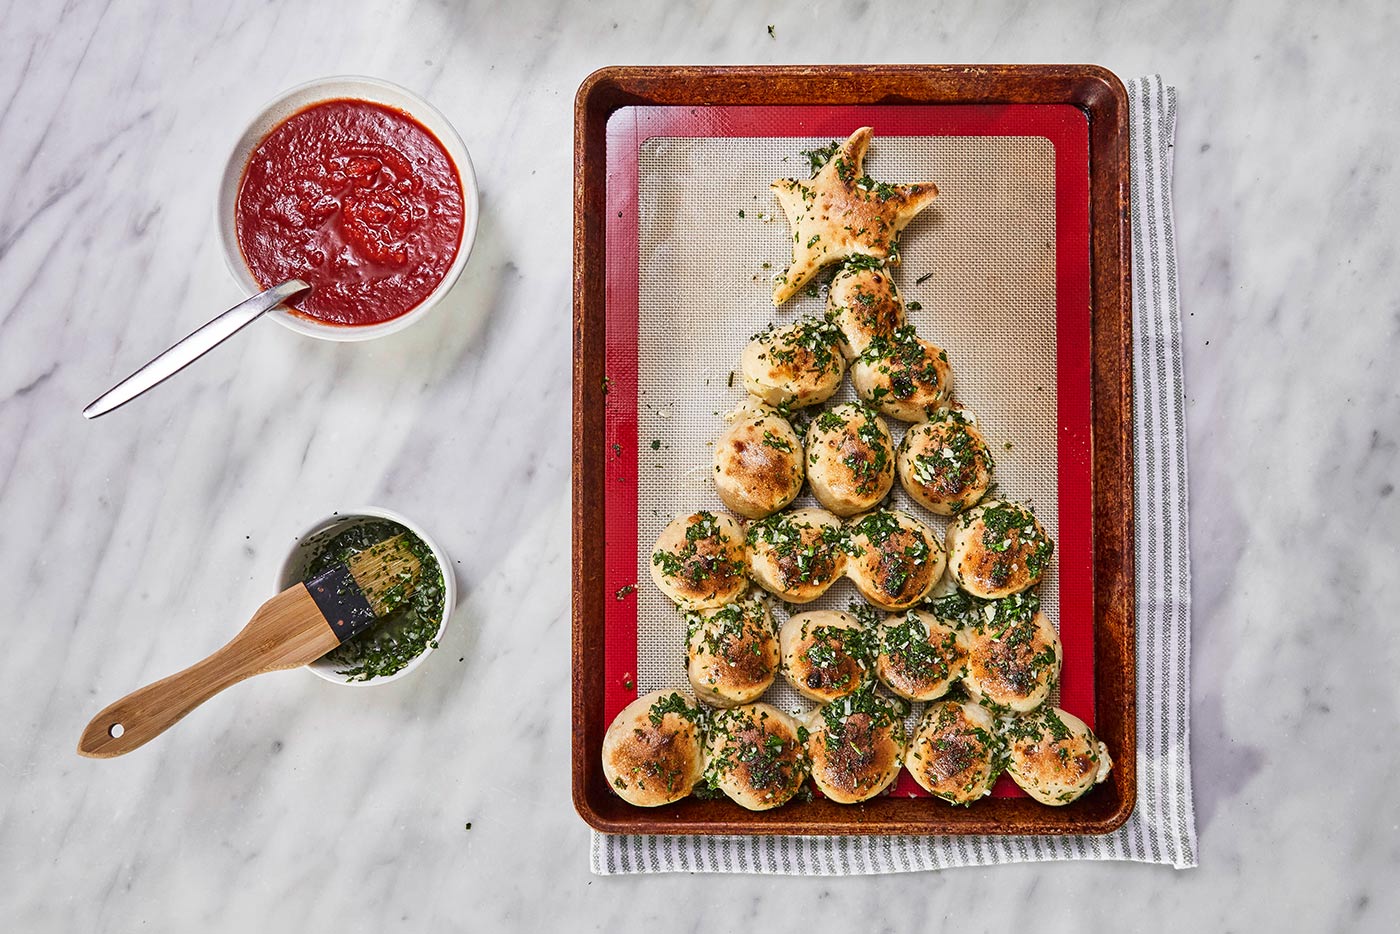 The finished appearance of Ooni's Stuffed Dough Balls Christmas Tree